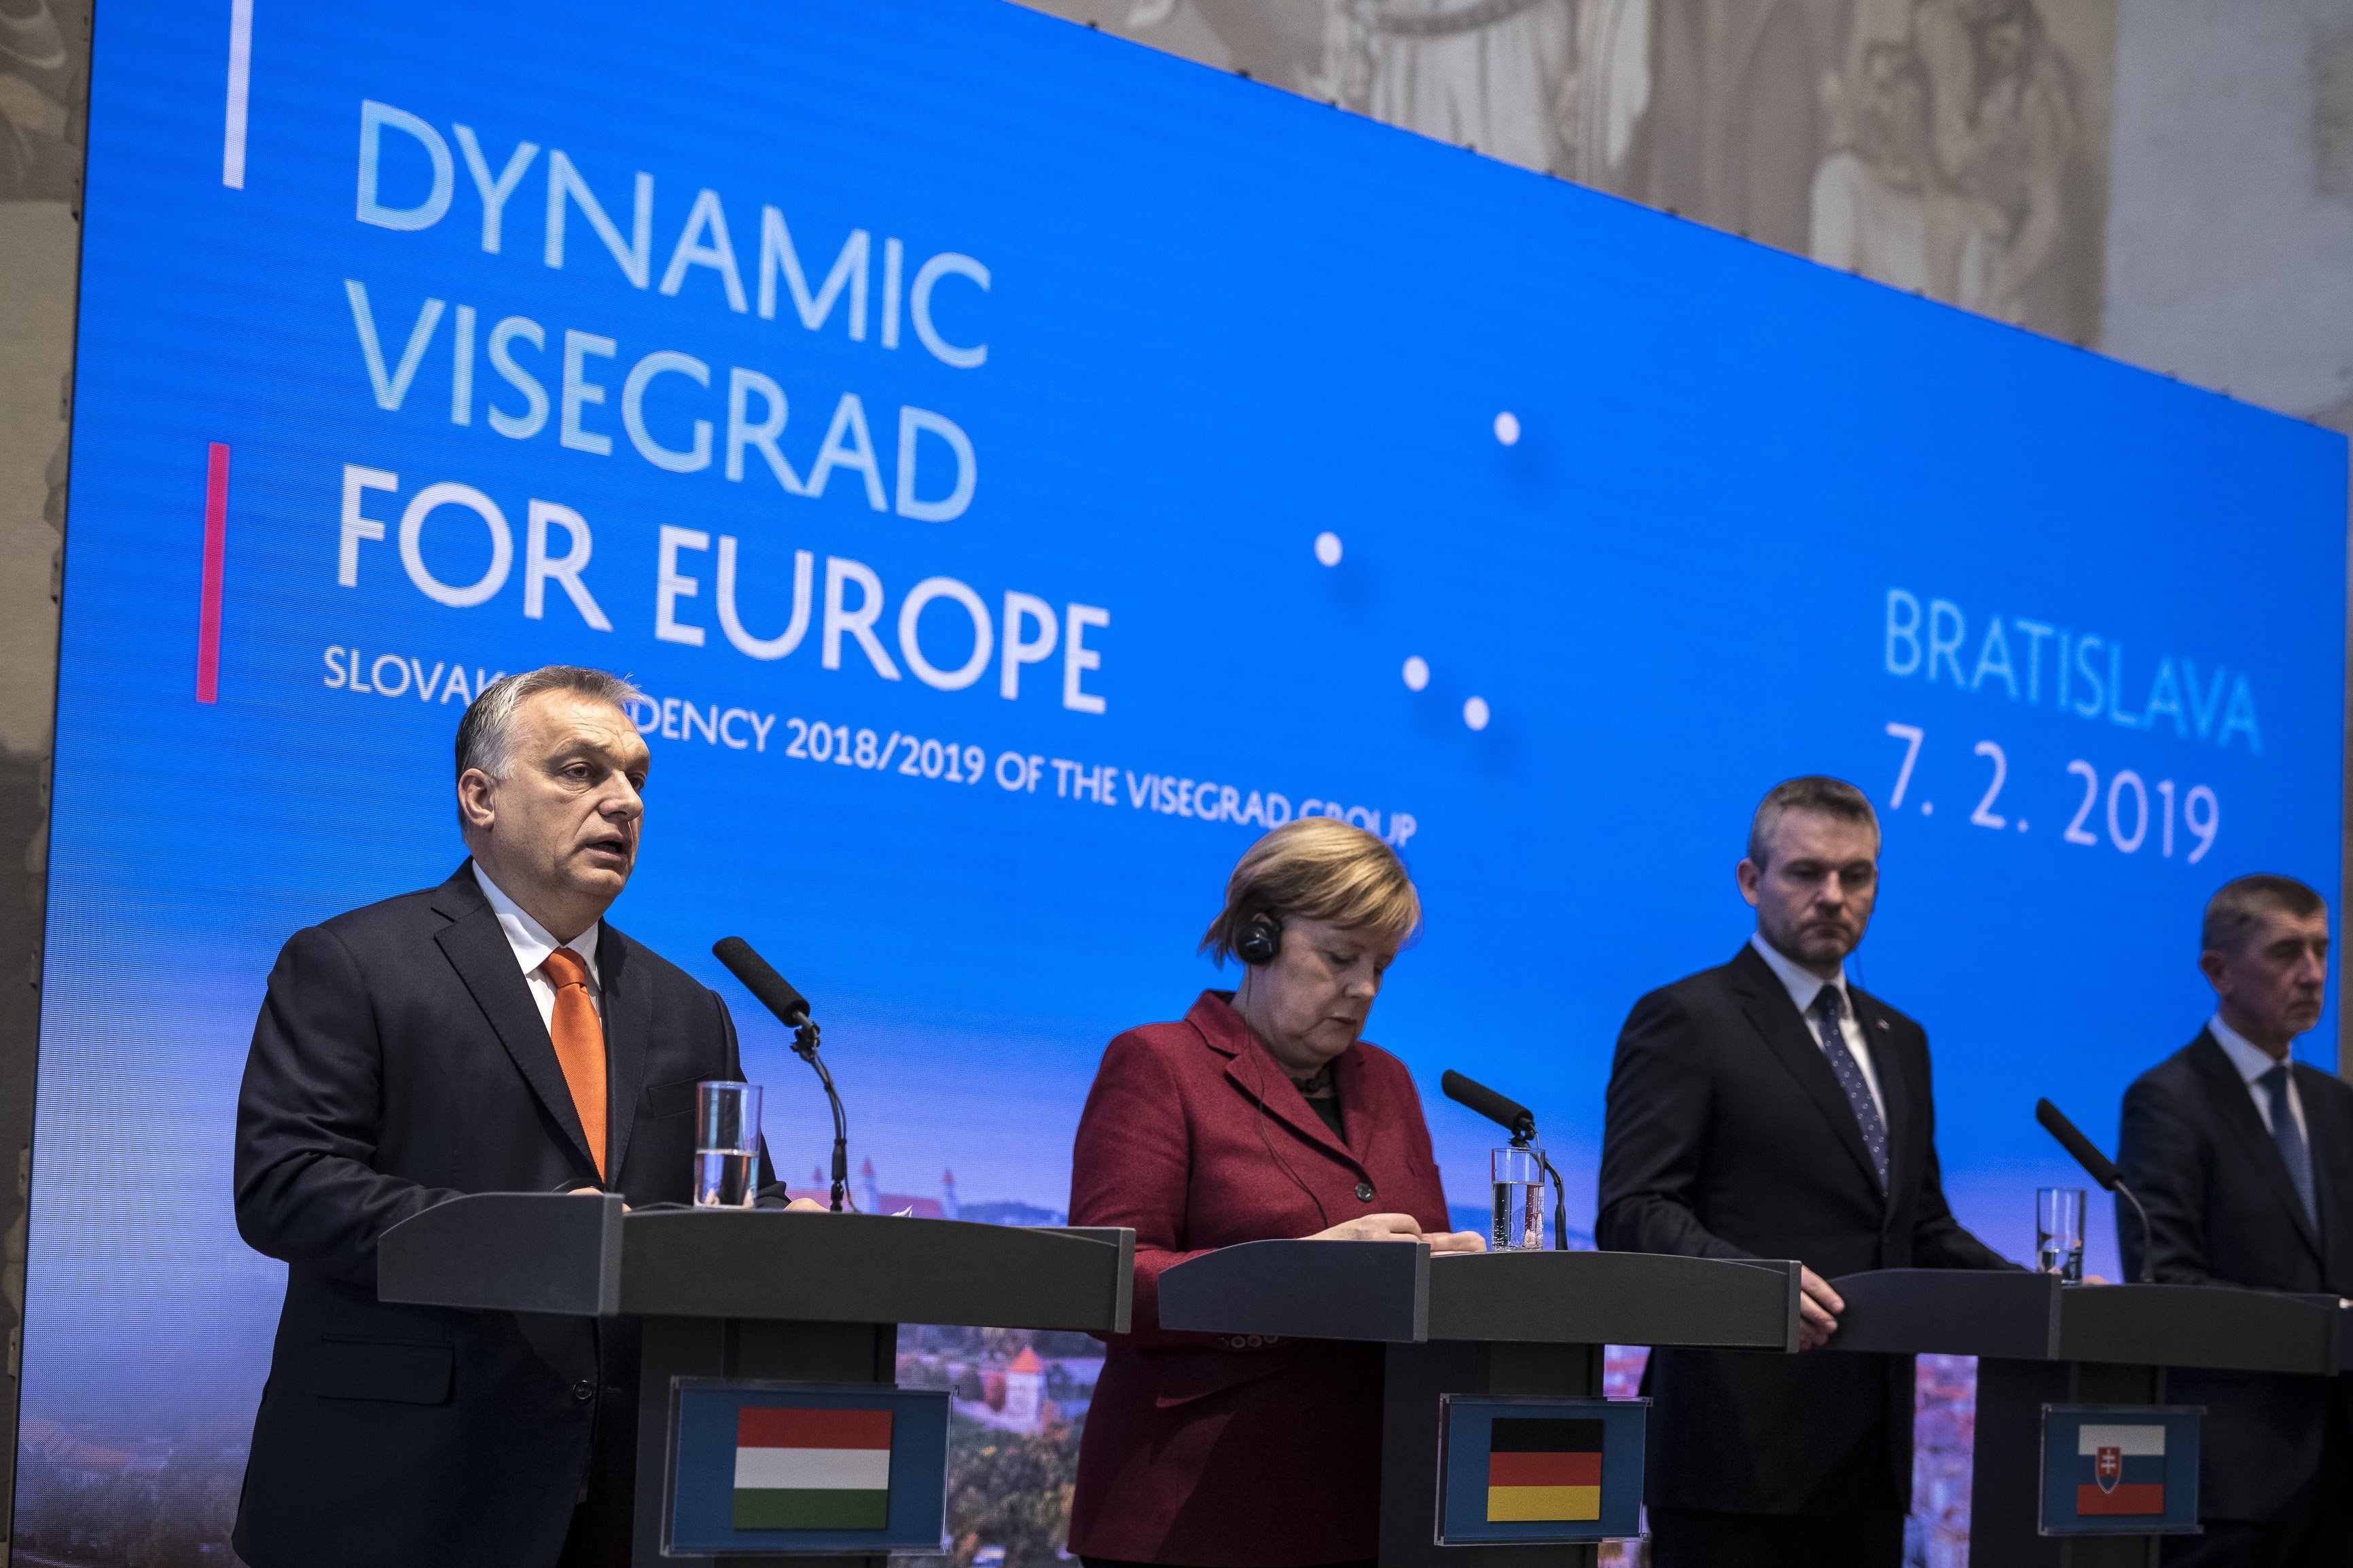 meeting of Visegrad Group prime ministers and German Chancellor Angela Merkel